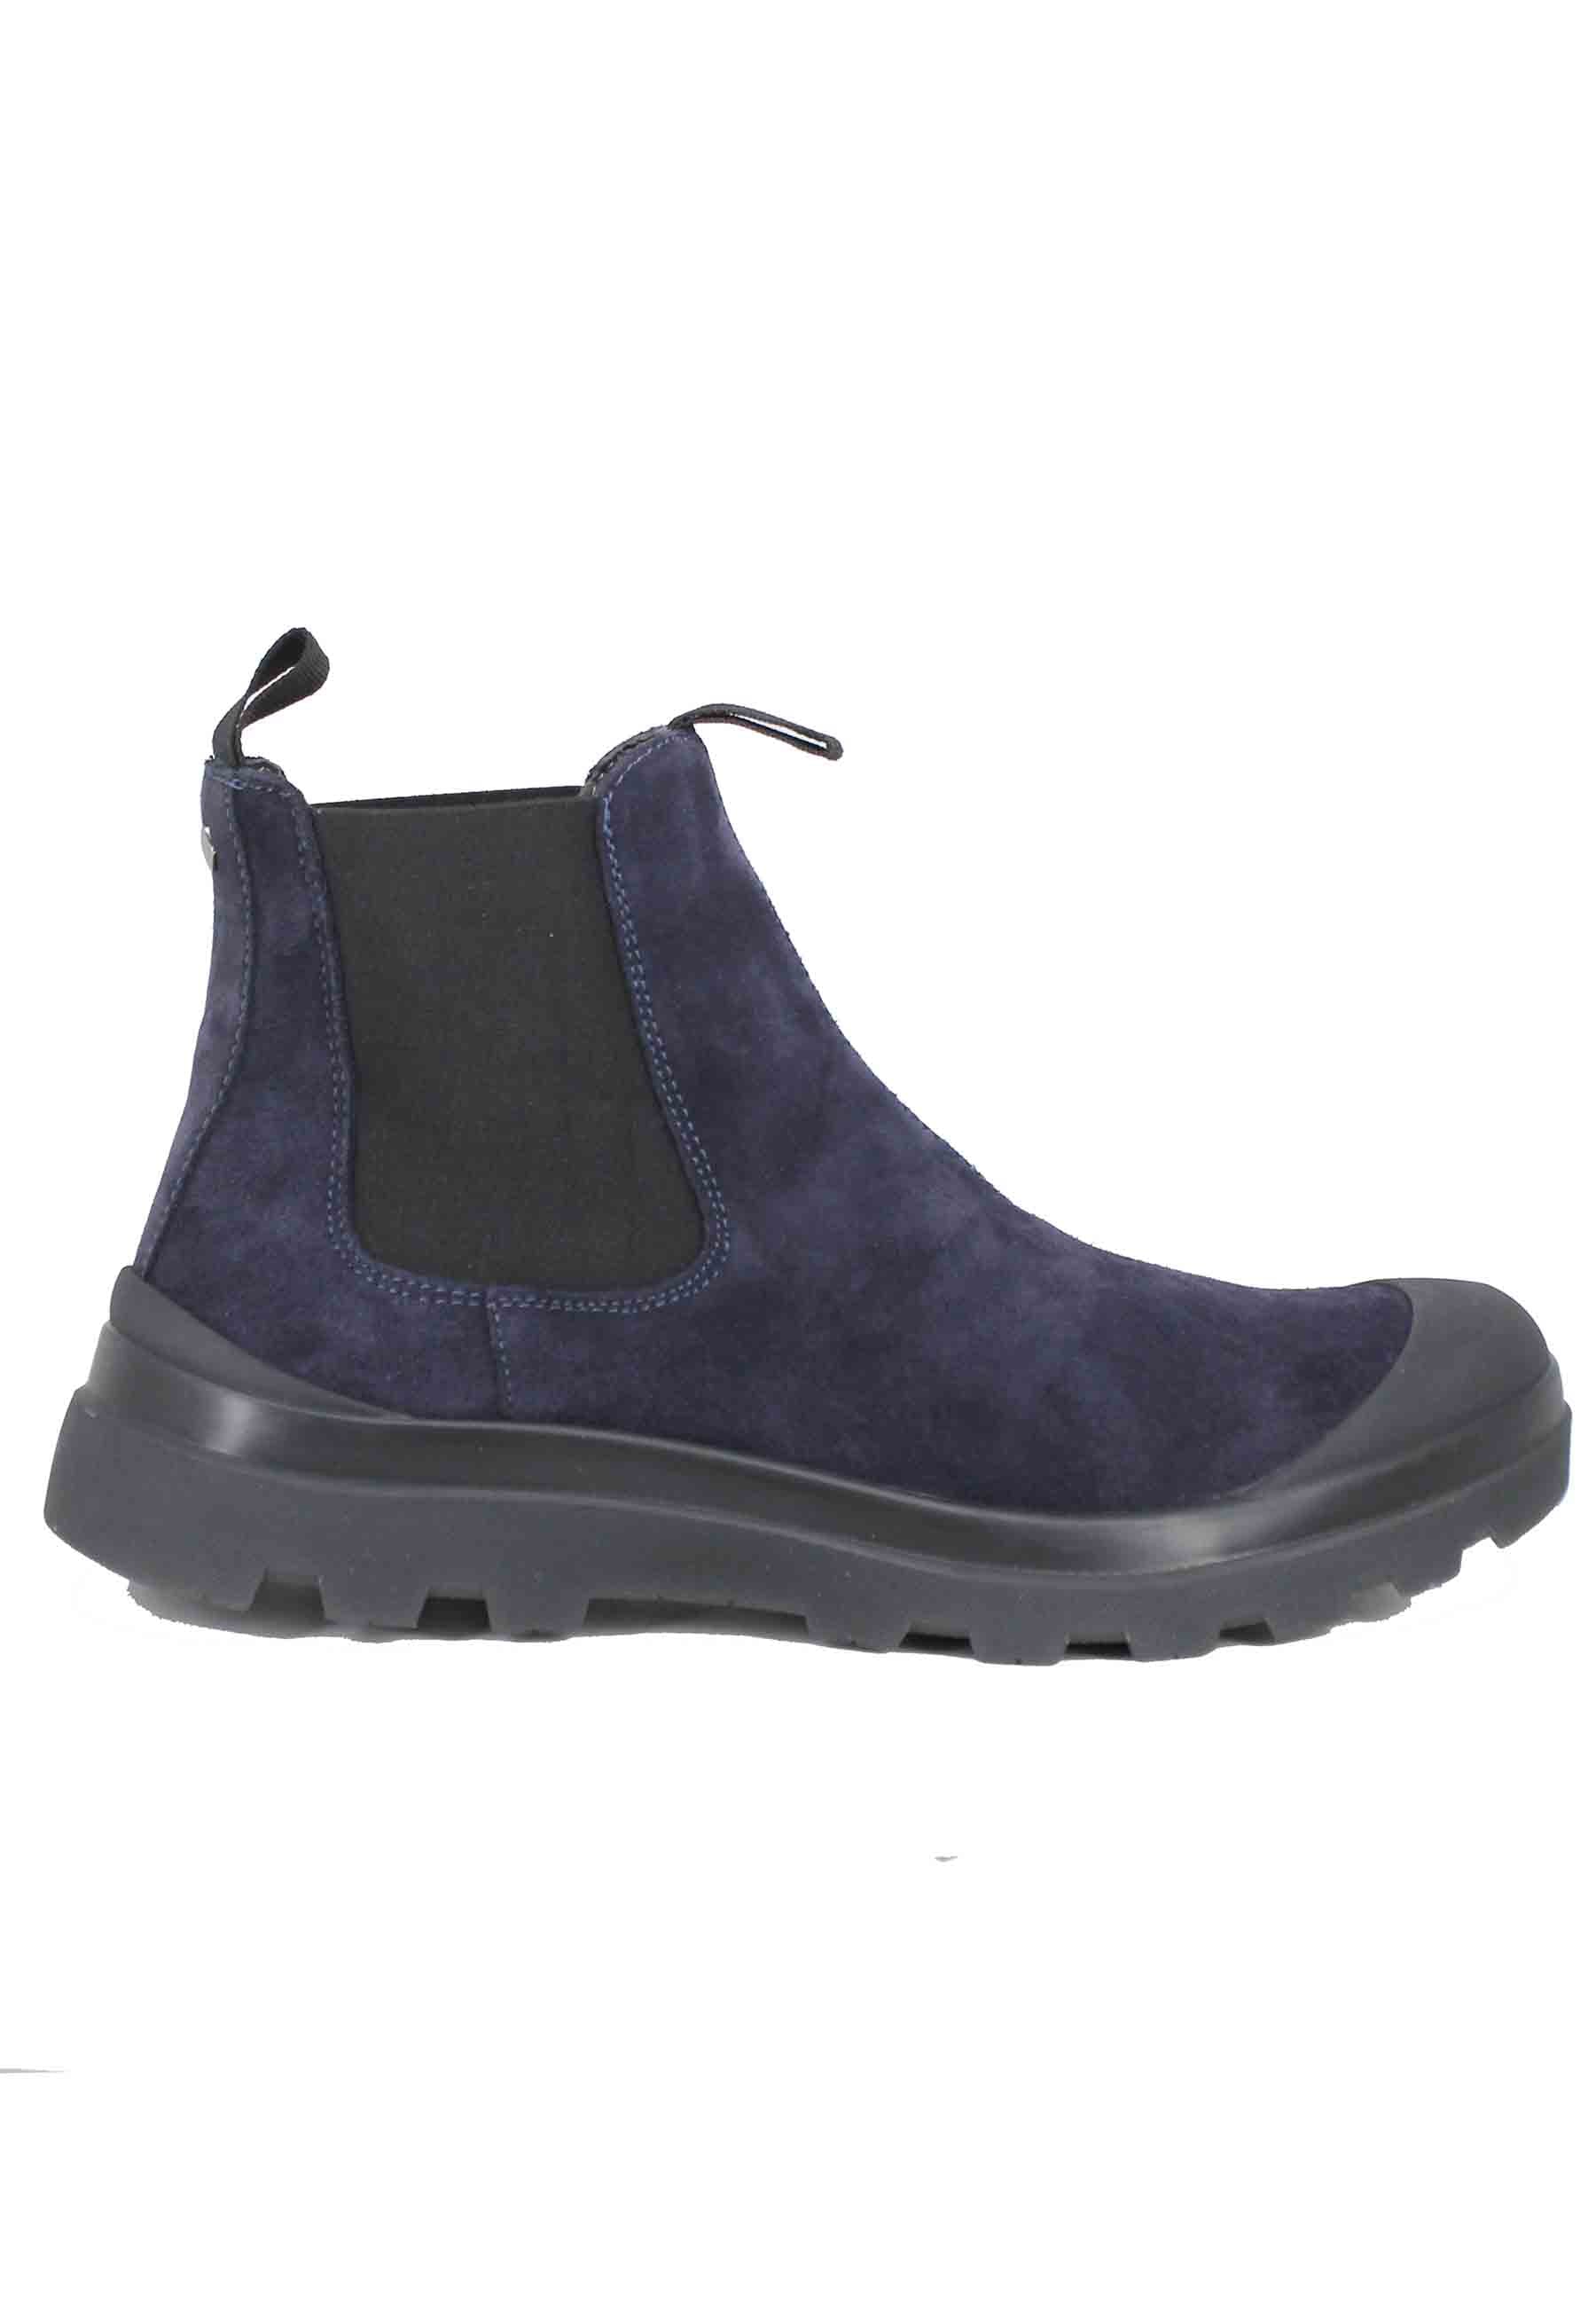 Men's blue suede ankle boot sneakers